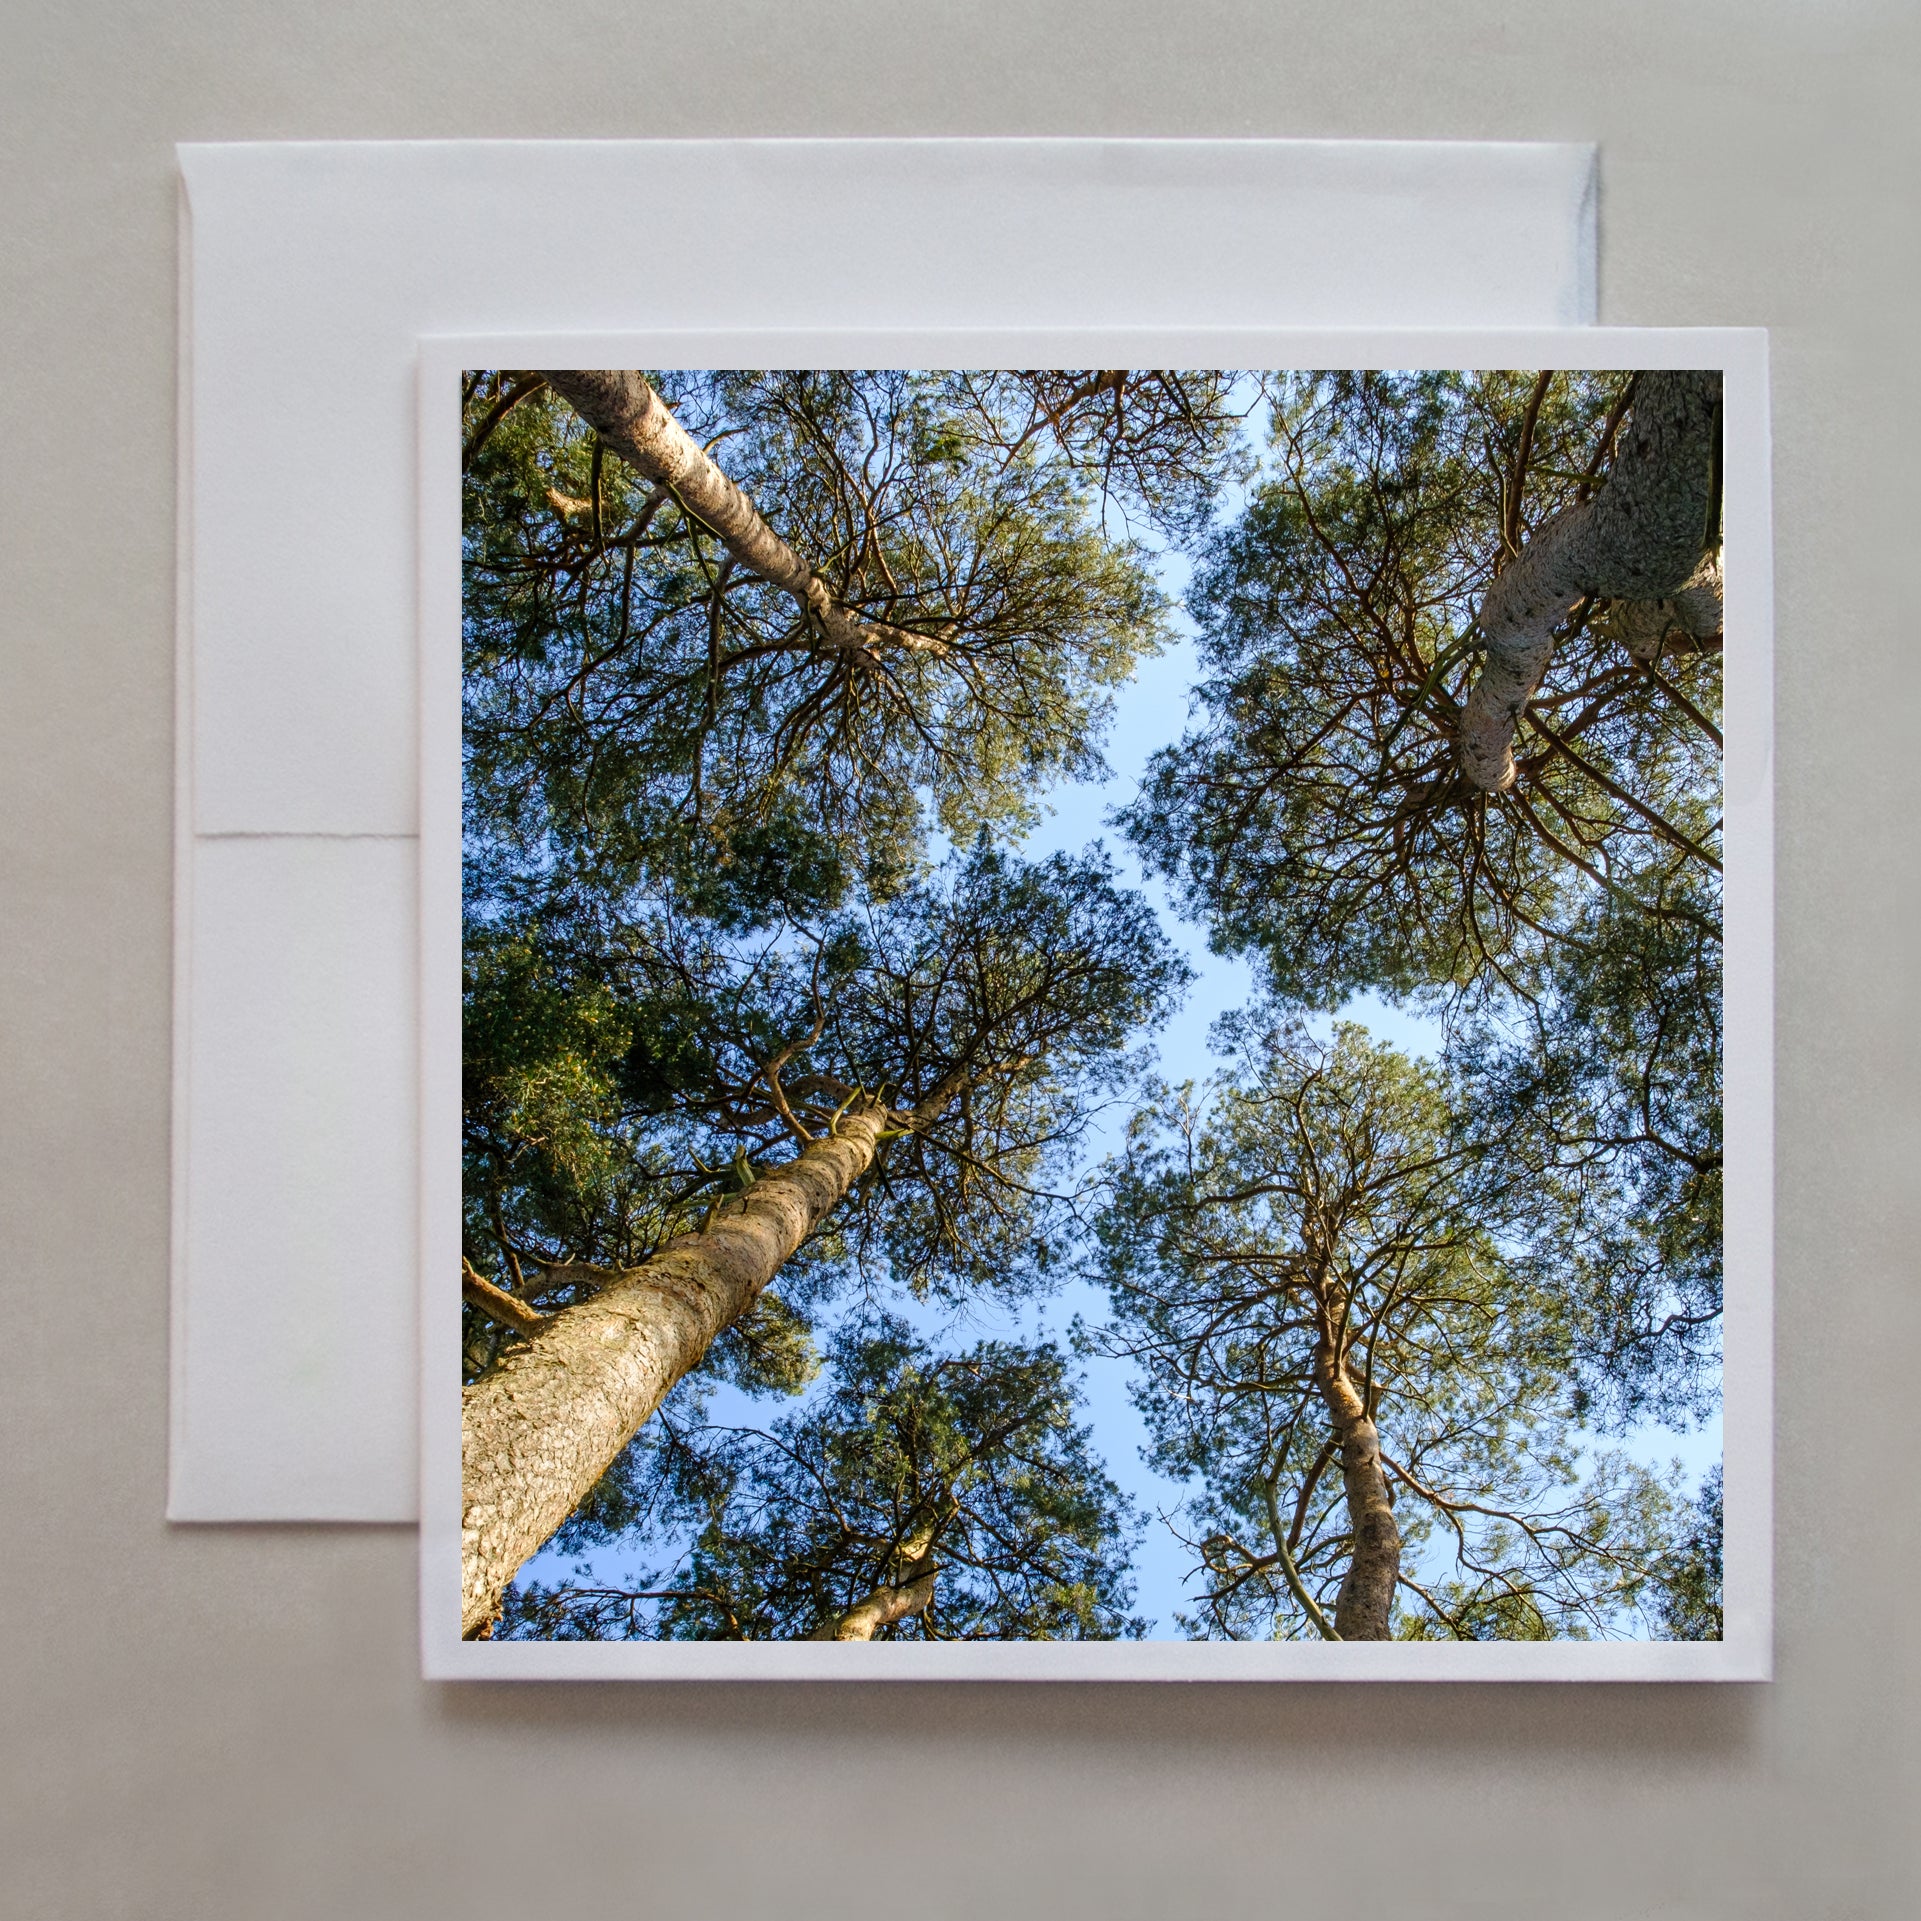 Looking up at the Scot Pines, the photograph feels like the trees are social distancing as the blue sky separates each of the trees' leaves  by photographer Judy Harrison Cochand.